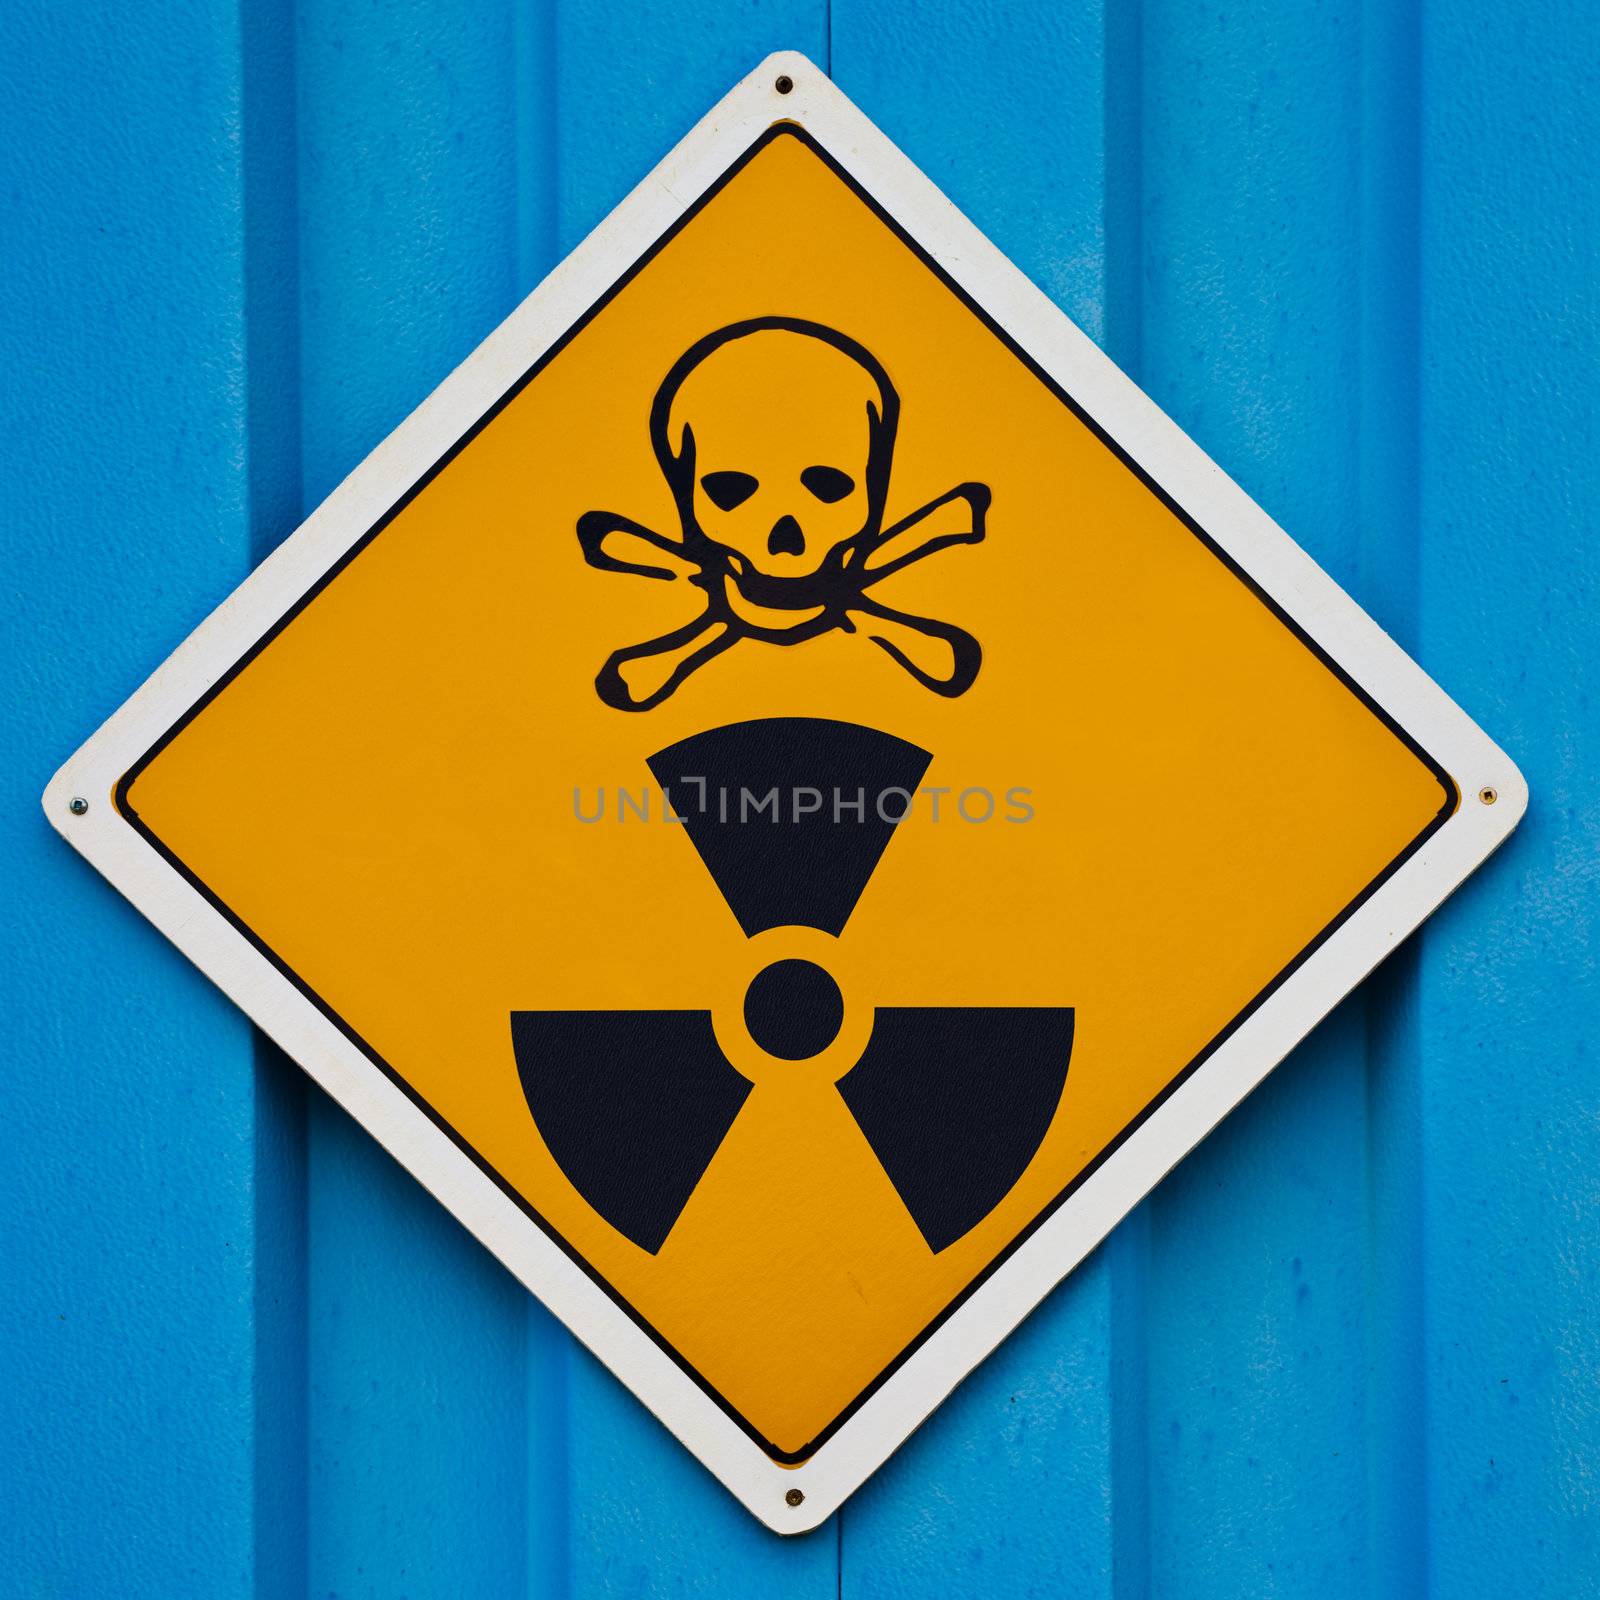 Deadly radiation warning sign by PiLens